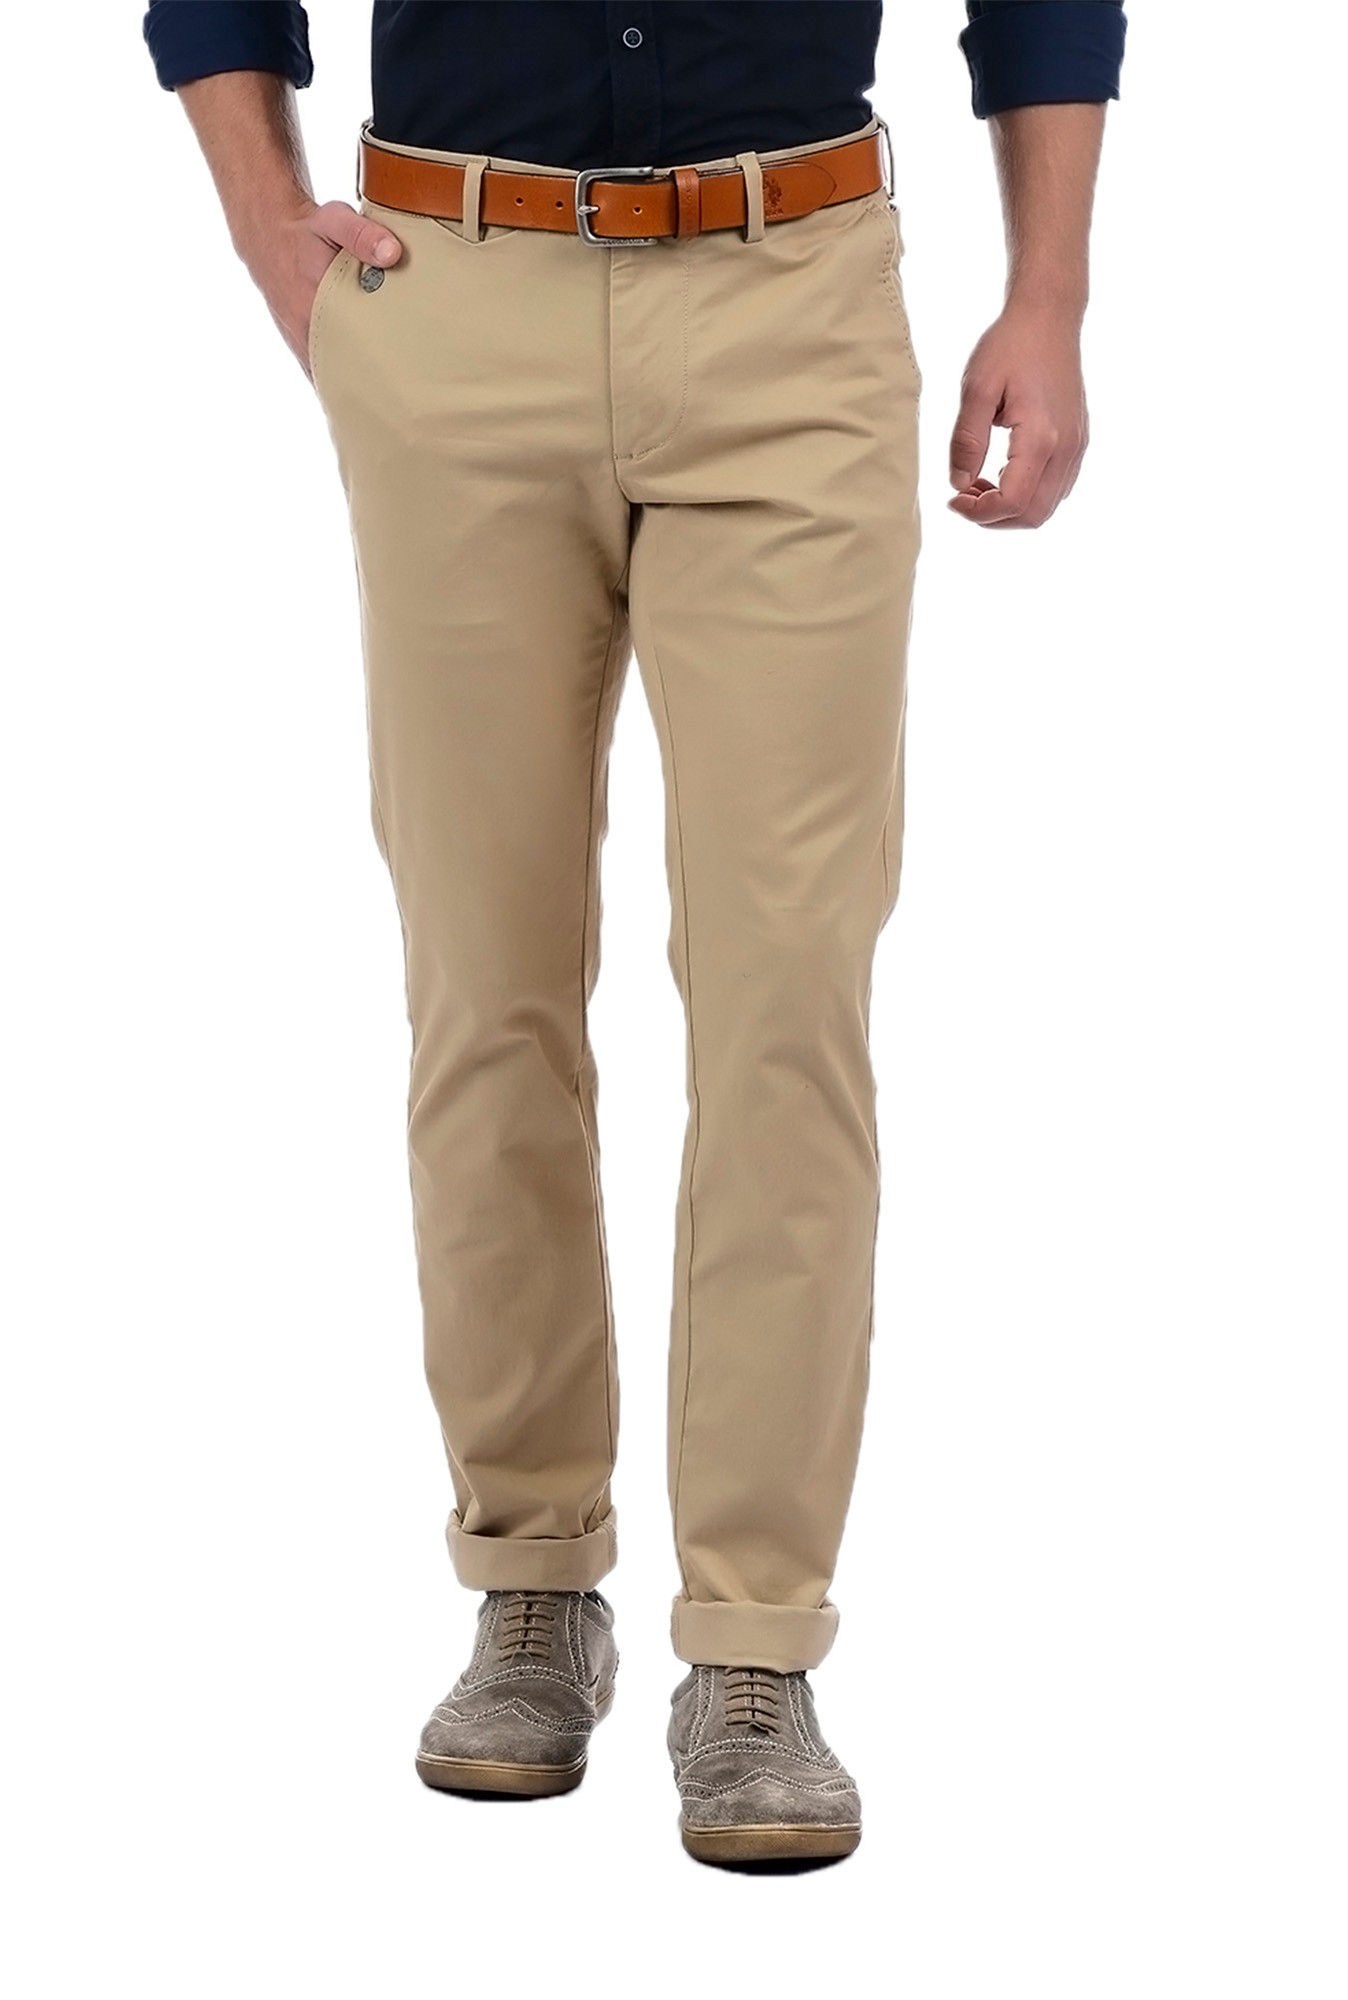 Indian Terrain ITBTR00065AMBER Boys Amber Cargo Solids Trouser Ees 45Y  in Indore at best price by DB Mens Wear  Justdial